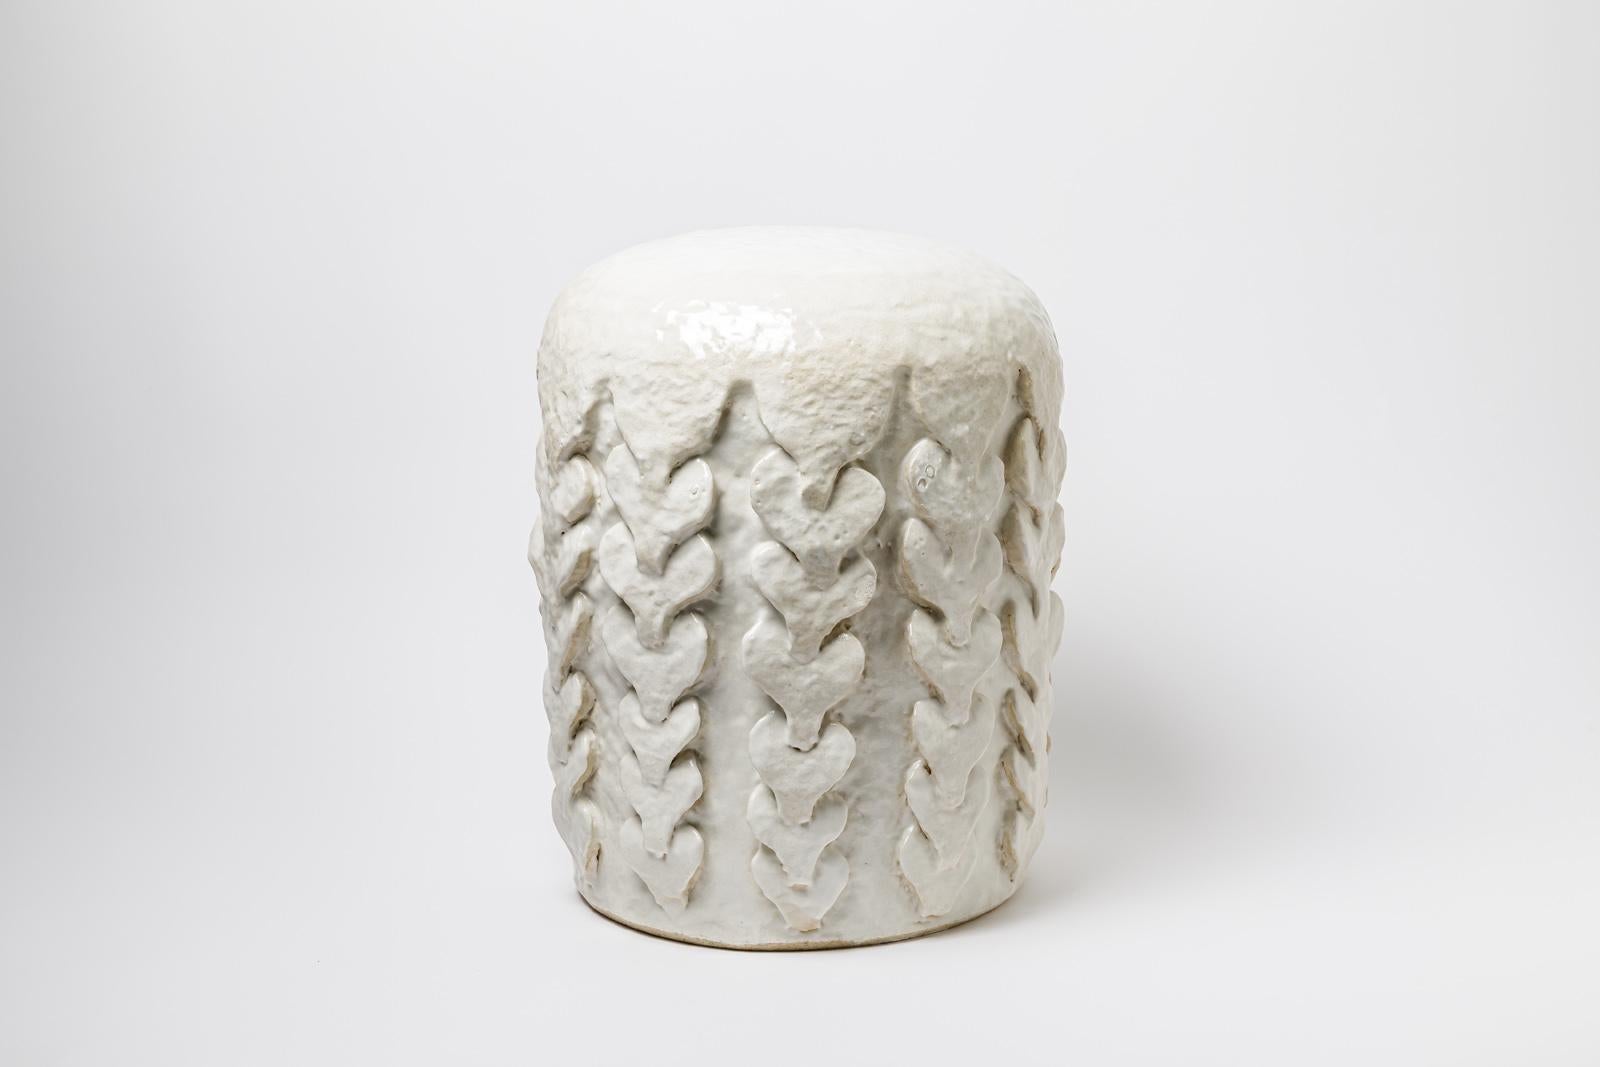 French Sculptural Stool 